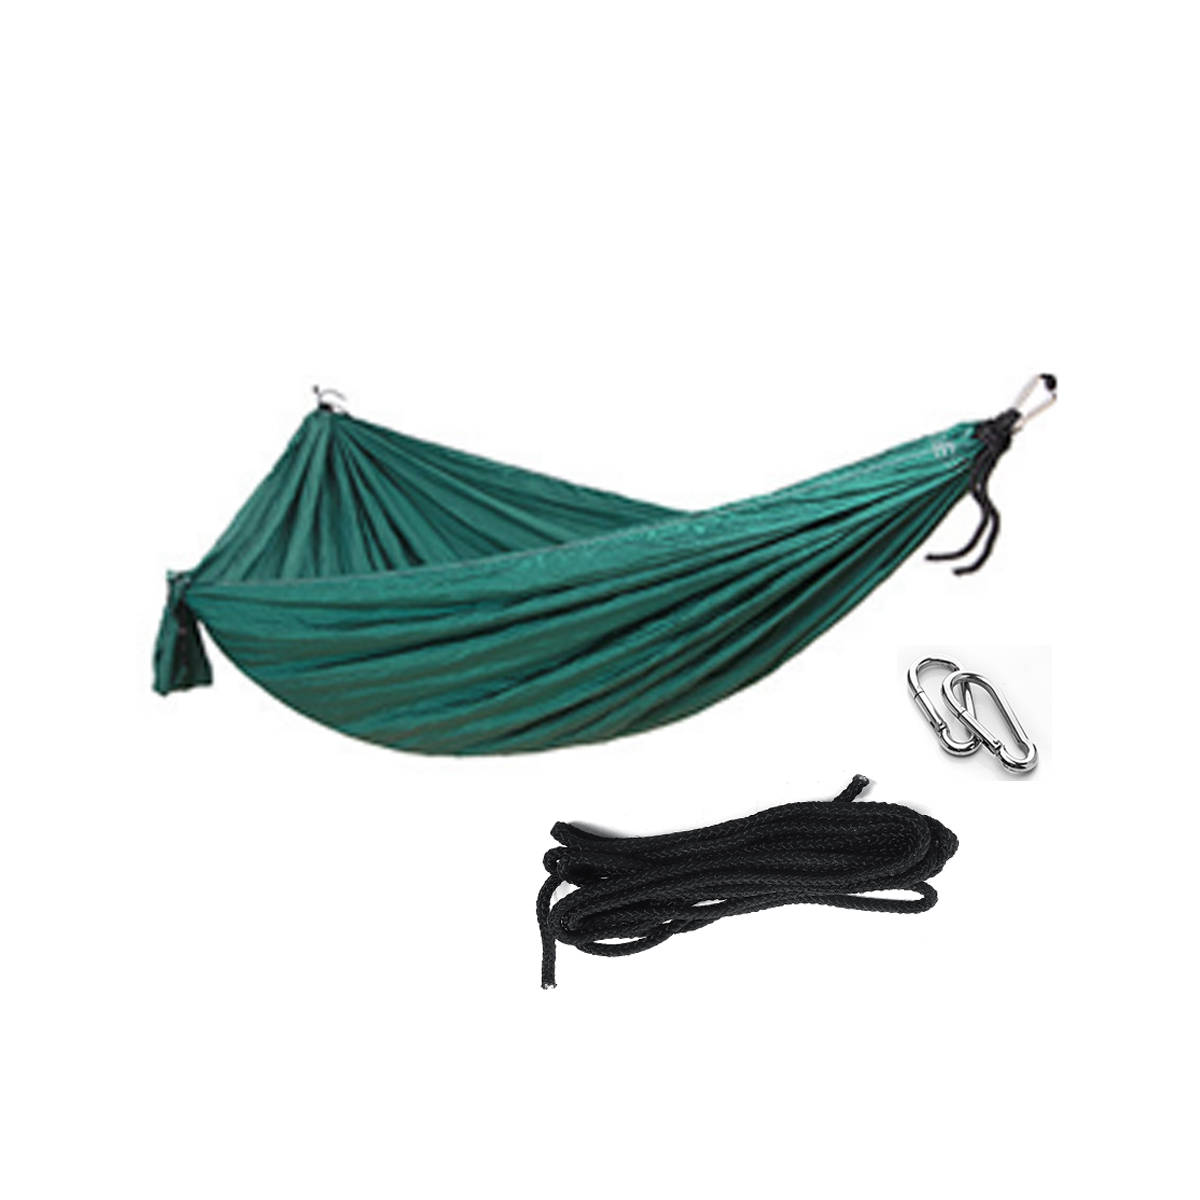 Outdoor-Travel-Double-Person-Hanging-Hammock-Max-Load-200KG-Portable-Camping-Hammock-Bed-1514882-4